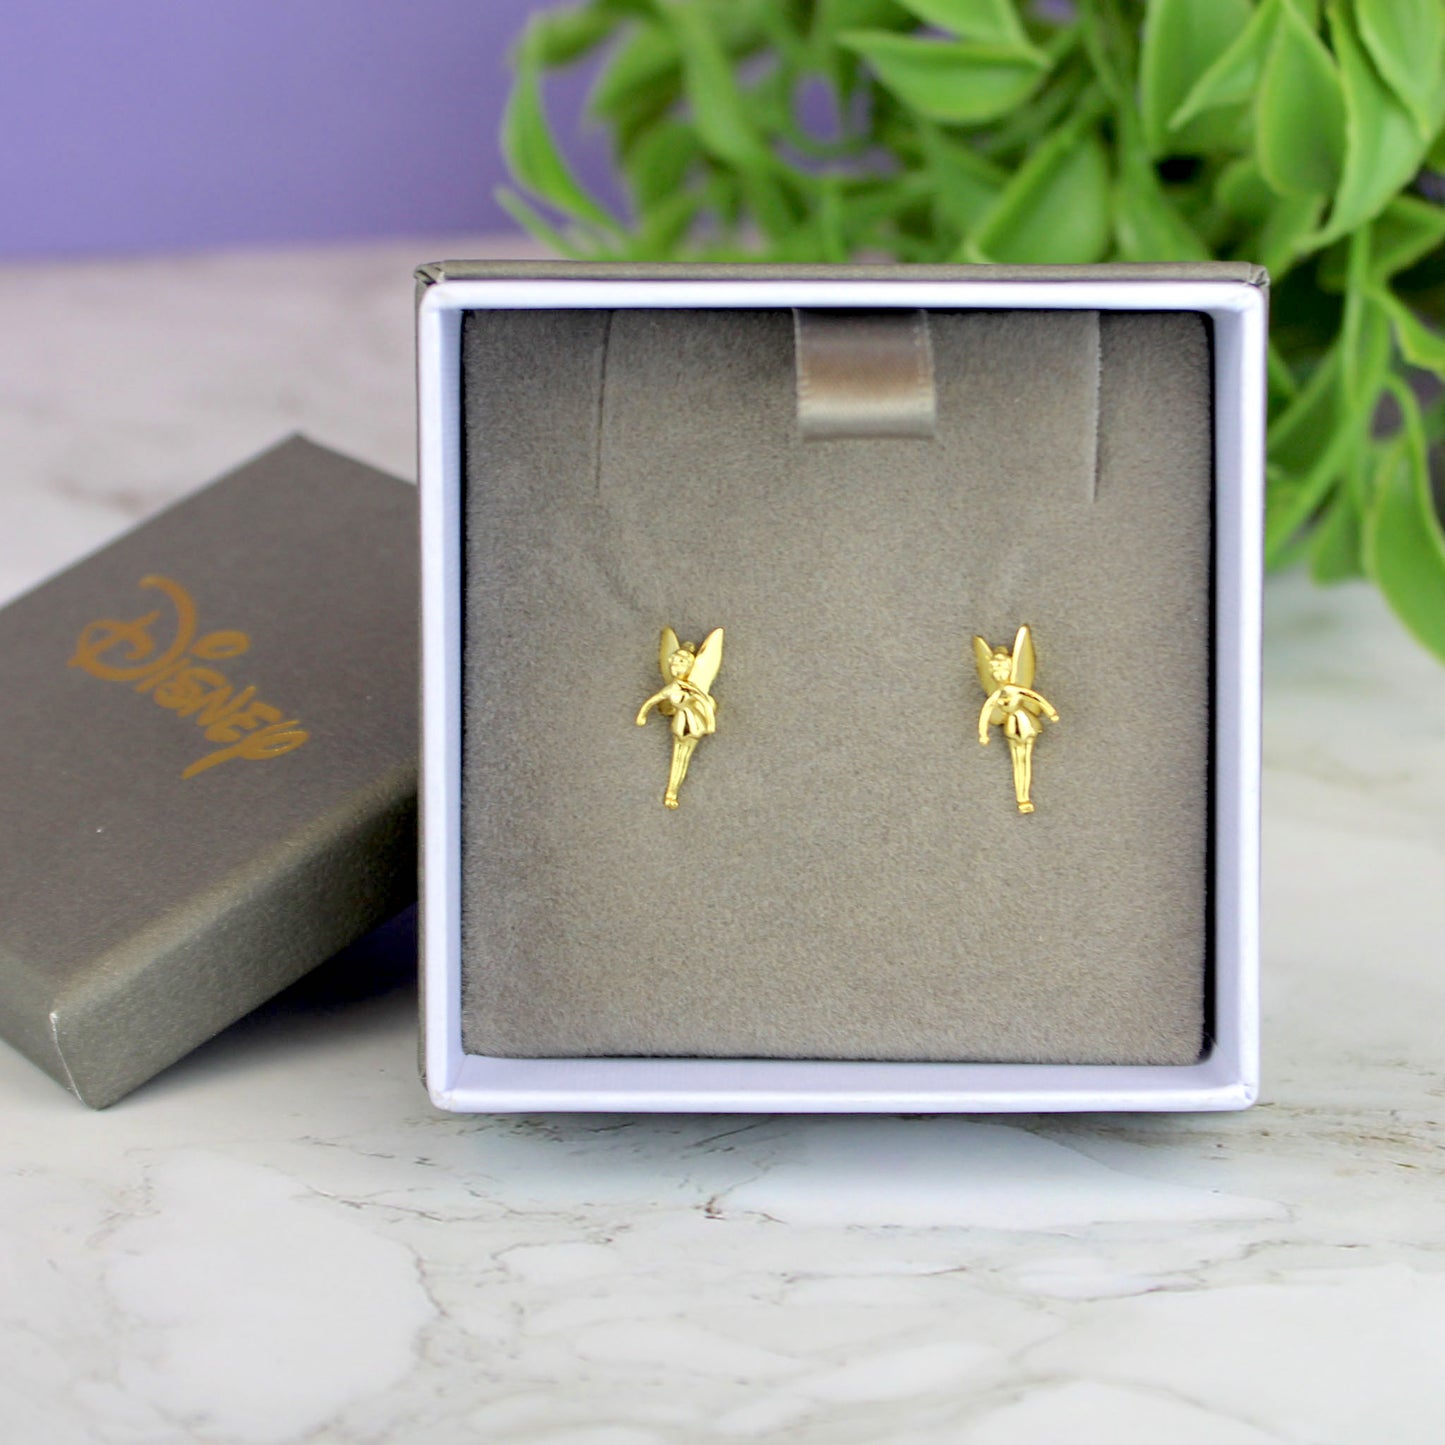 Load image into Gallery viewer, Tinker Bell (Peter Pan) Disney Gold Plated Stud Earrings
